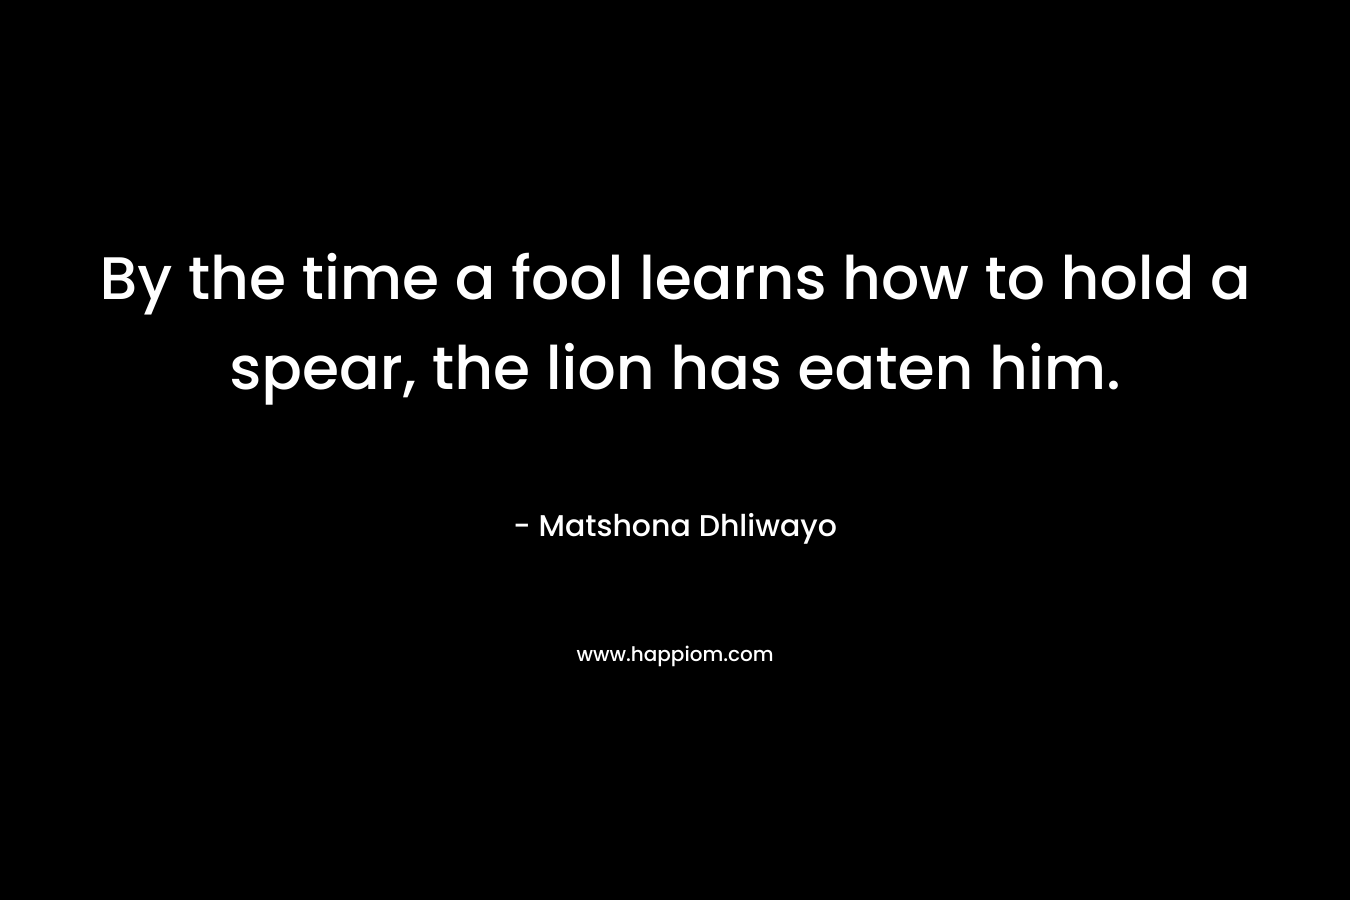 By the time a fool learns how to hold a spear, the lion has eaten him. – Matshona Dhliwayo